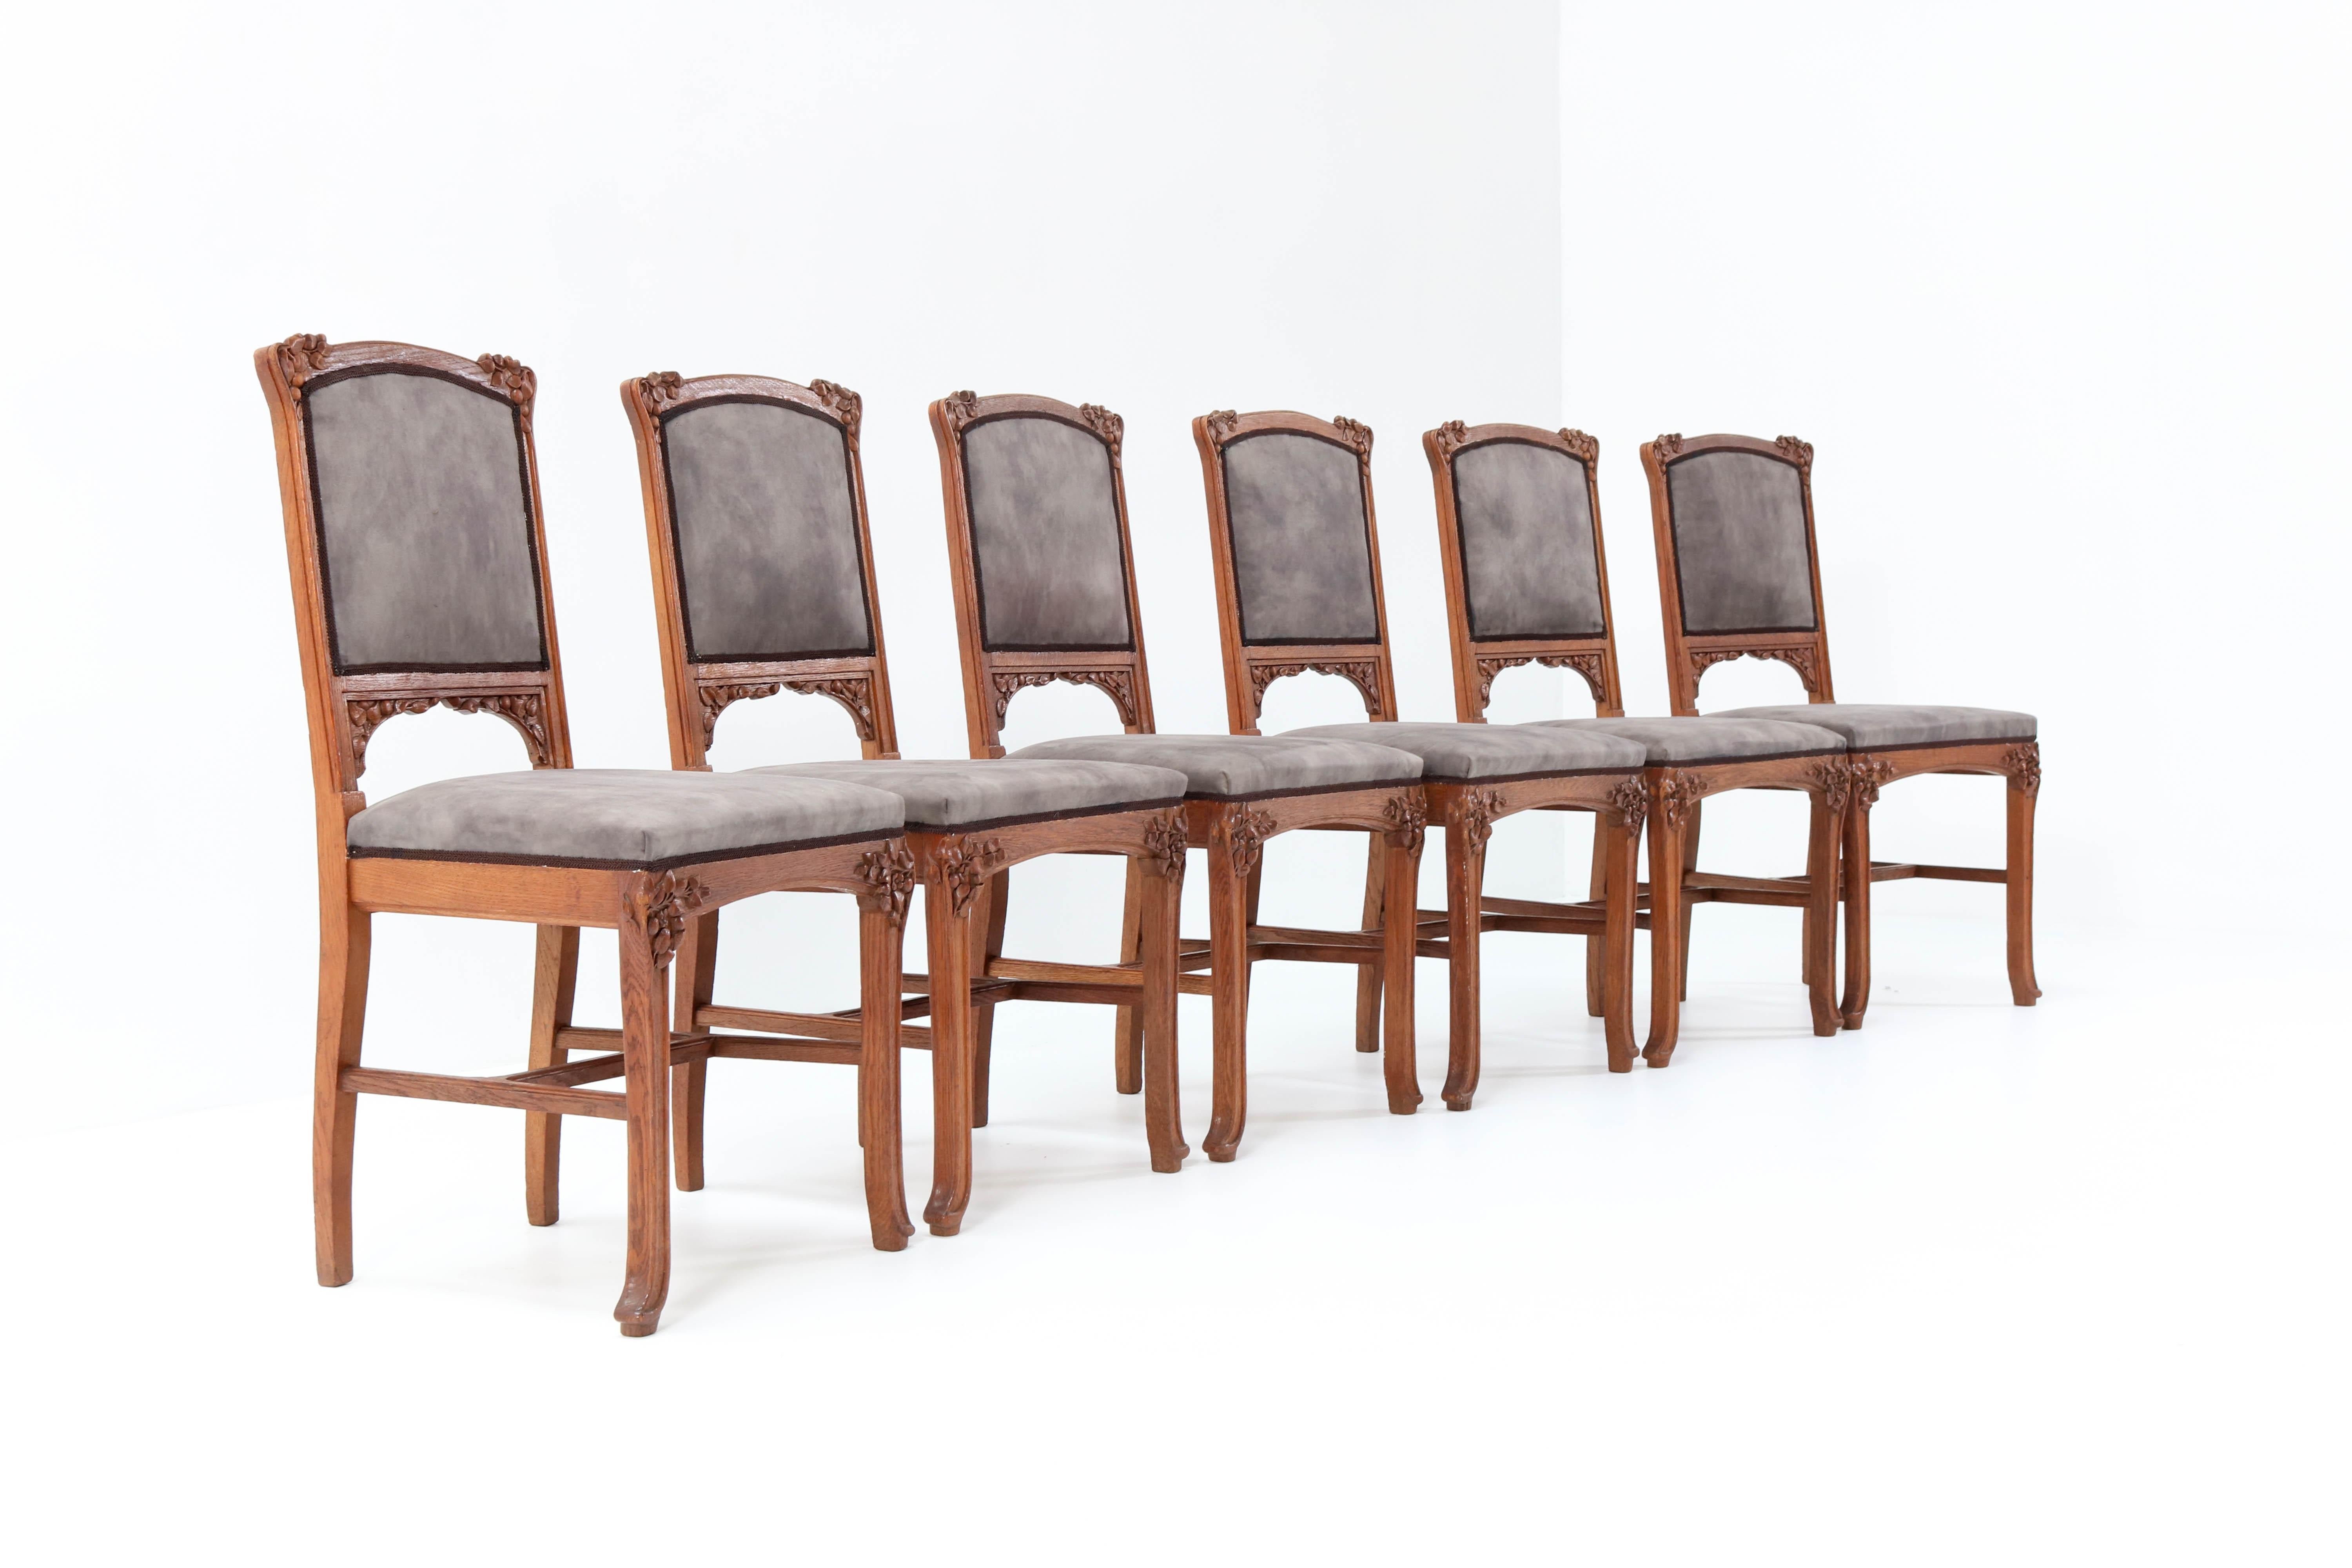 Magnificent and rare set of six Art Nouveau chairs.
Design attributed to Jacques Gruber.
Striking French design from the 1900s.
Solid oak with wonderful hand carved details.
Re-upholstered with a quality taupe Italian fabric.
In very good